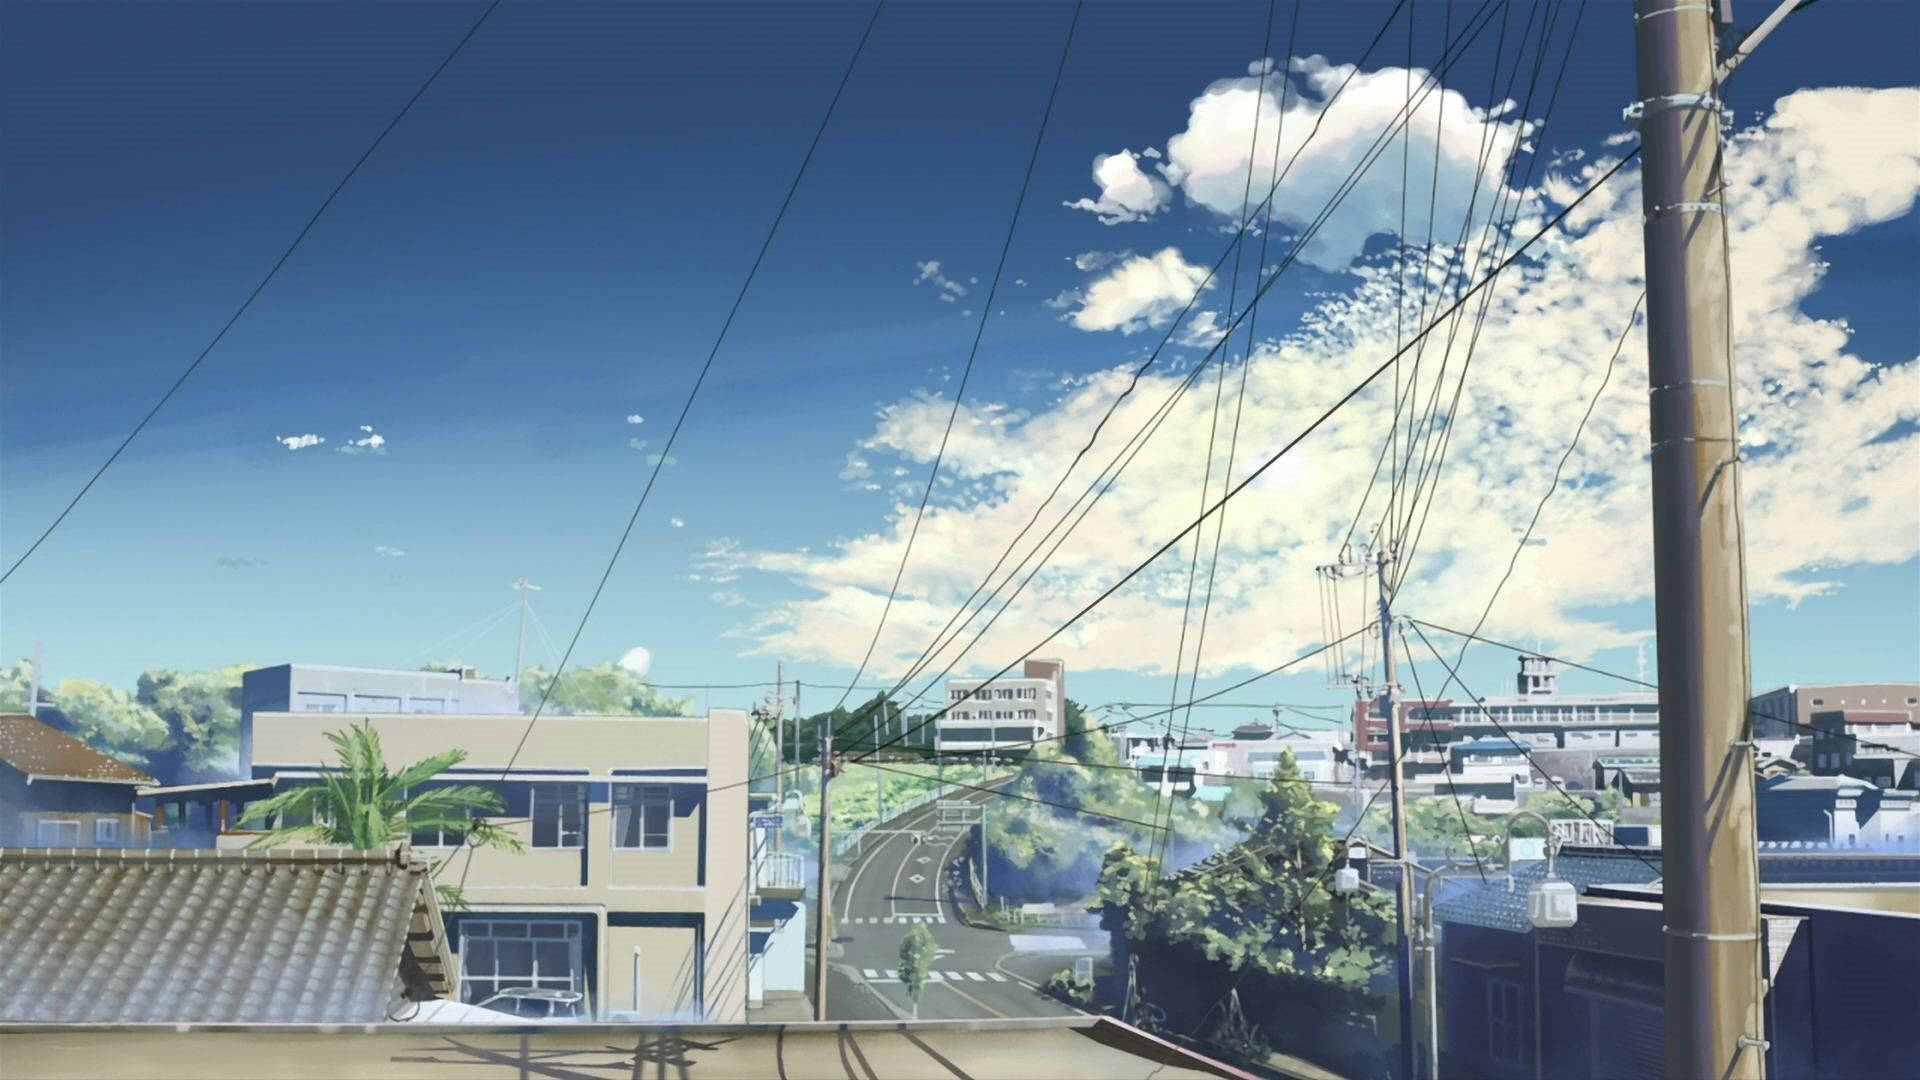 An anime aesthetic wallpaper of a sunny day in a small town - 1920x1080